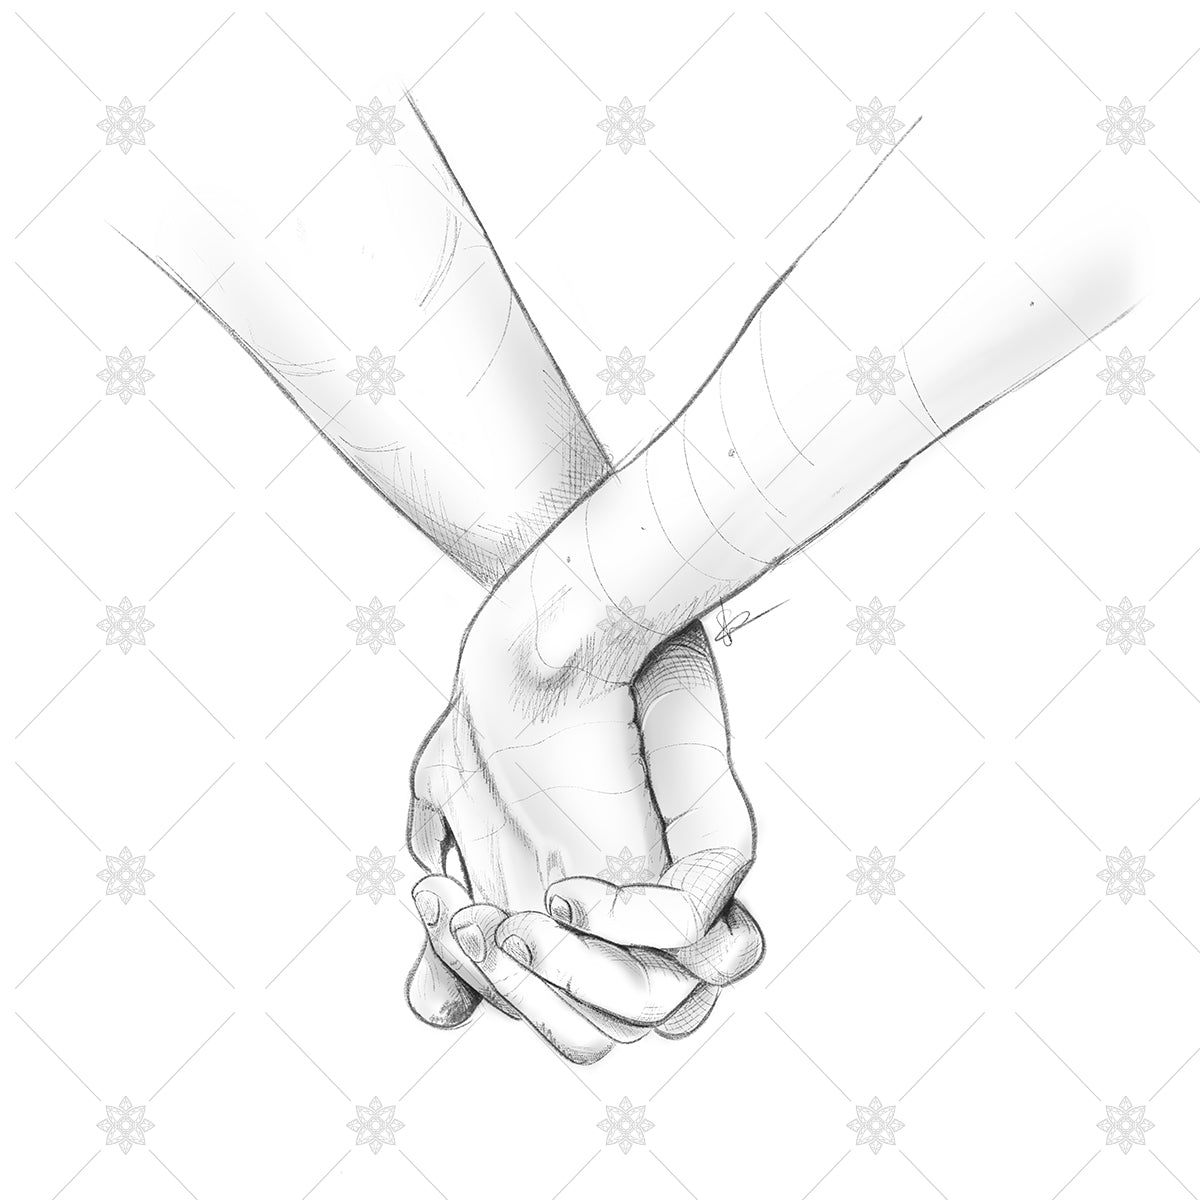 Holding hands pencil sketch - SK1035 – JEWELLERY GRAPHICS